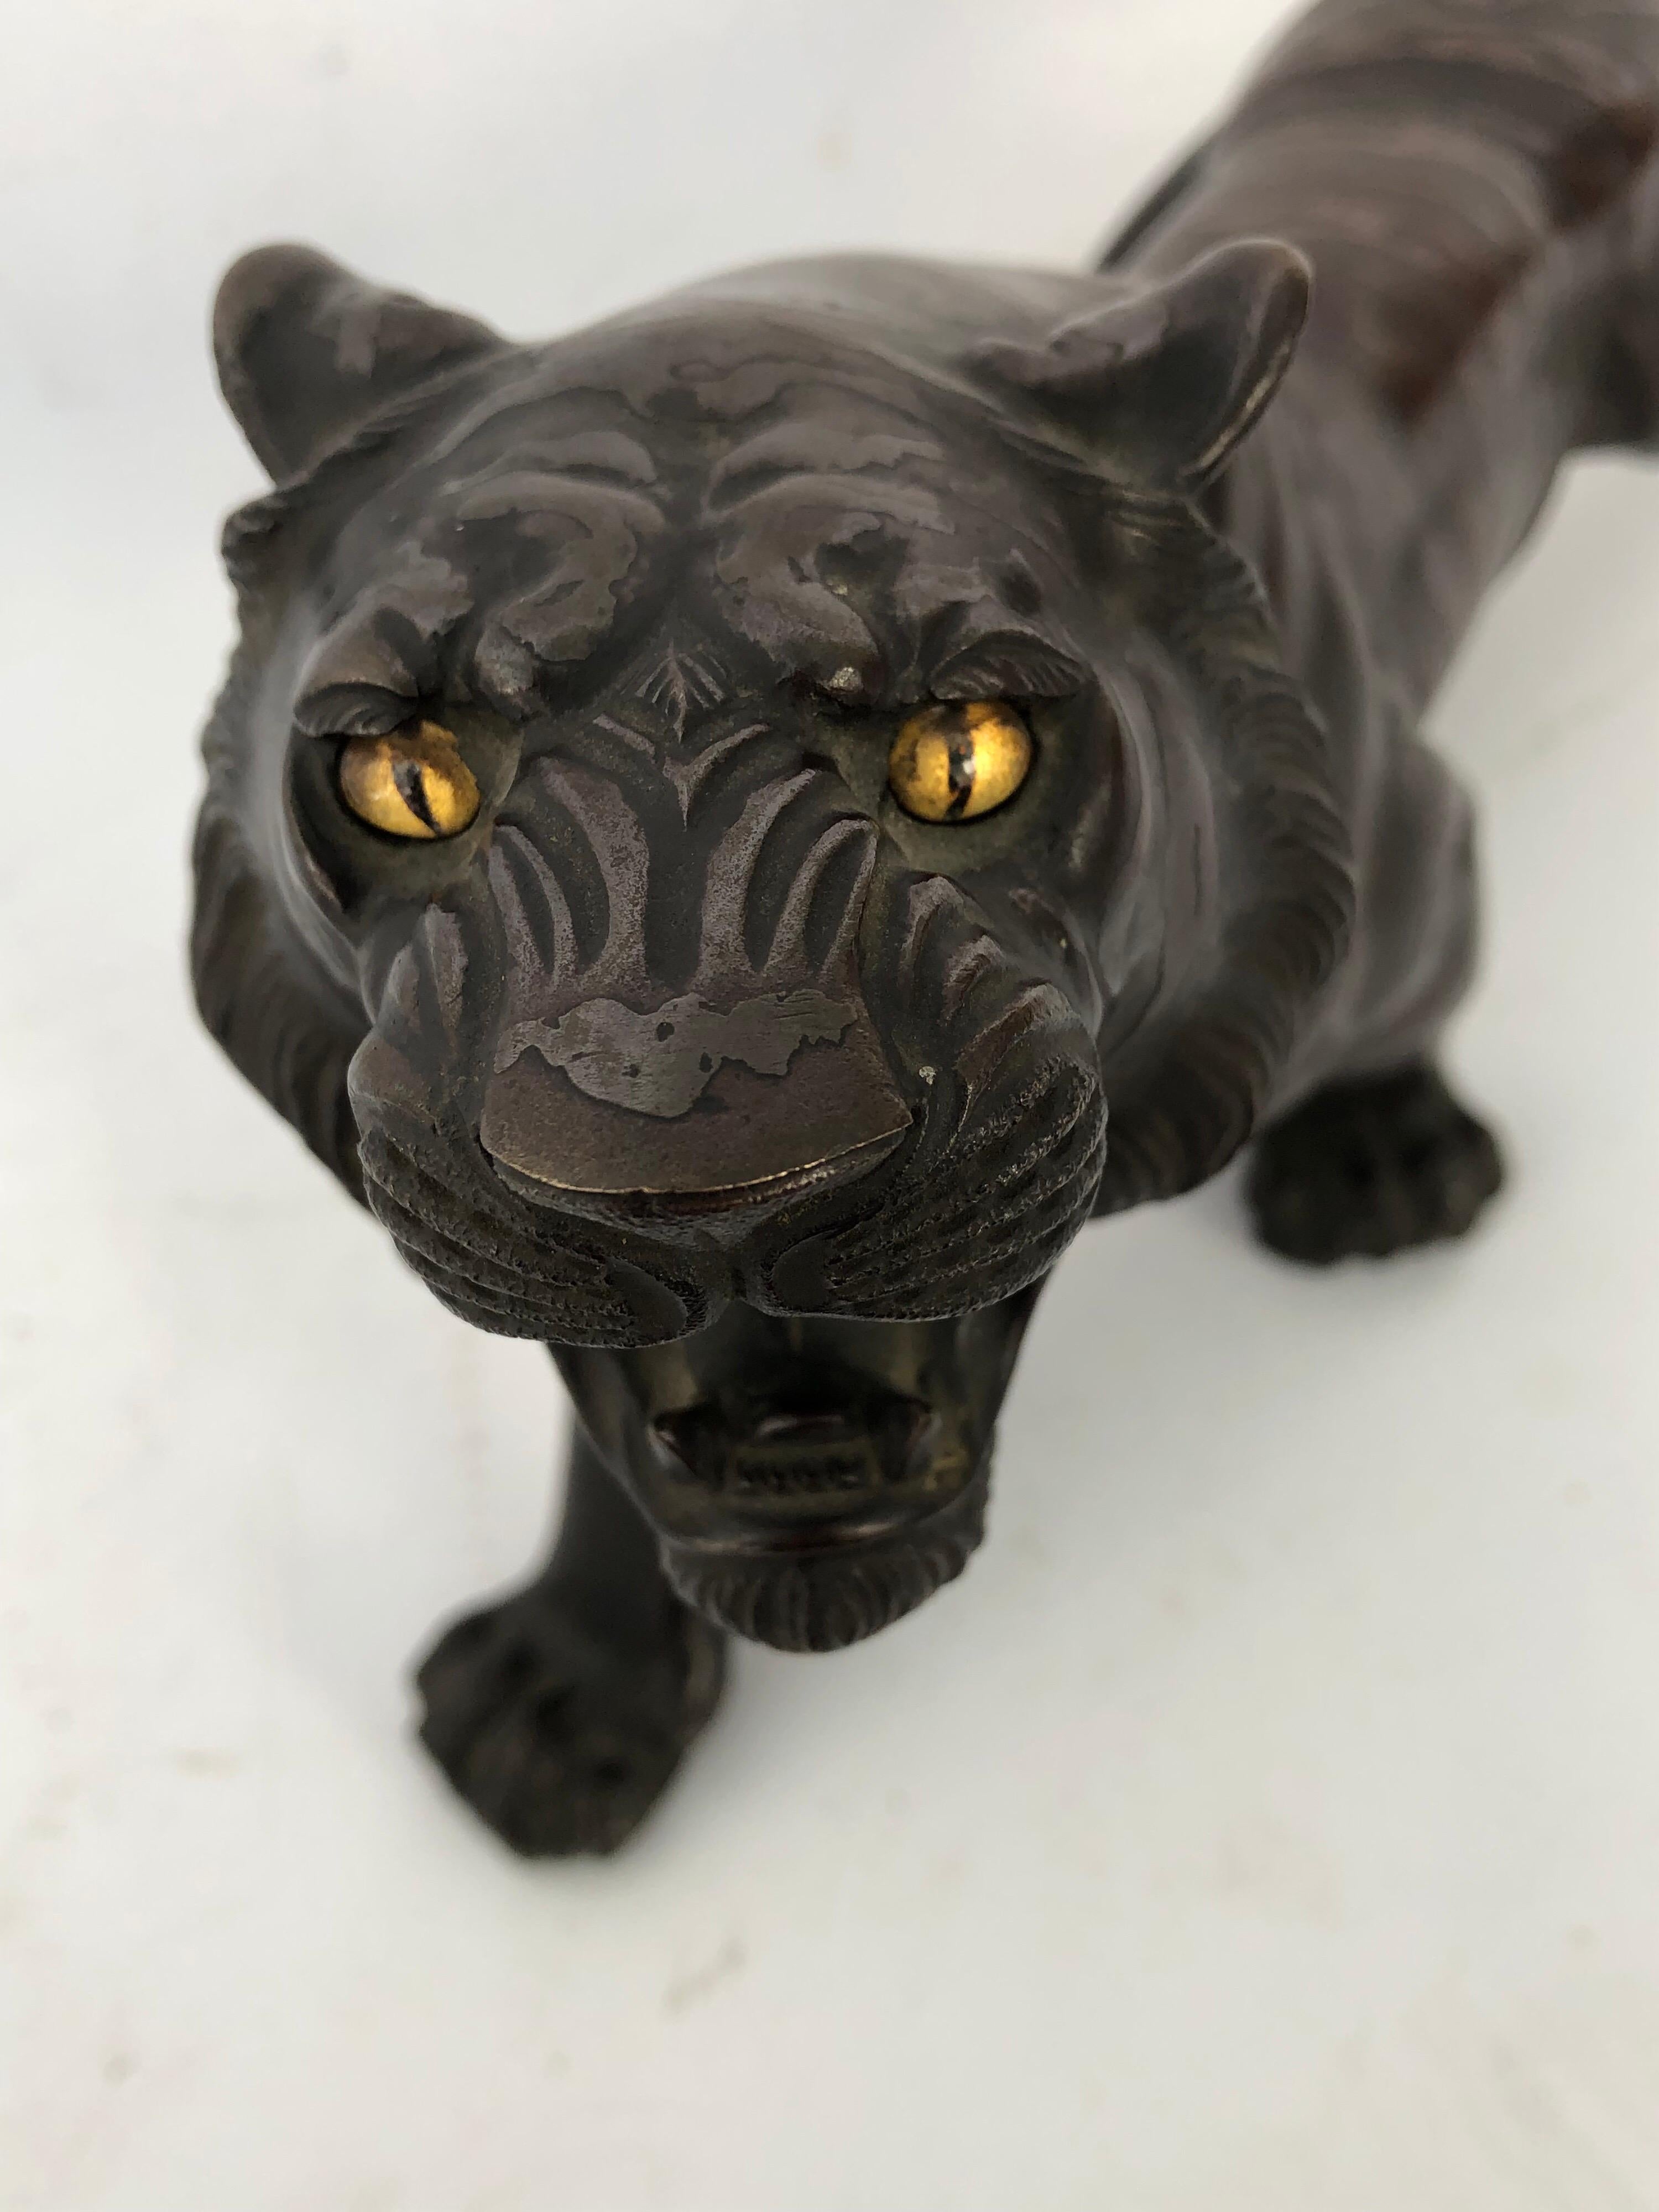 Japanese bronze patinated figure of a prowling tiger. Glass/crystal eyes, two metal
bronze body, replicating tiger stripes. Two character mark on base. Probably Meiji, late 19th-early 20th century.